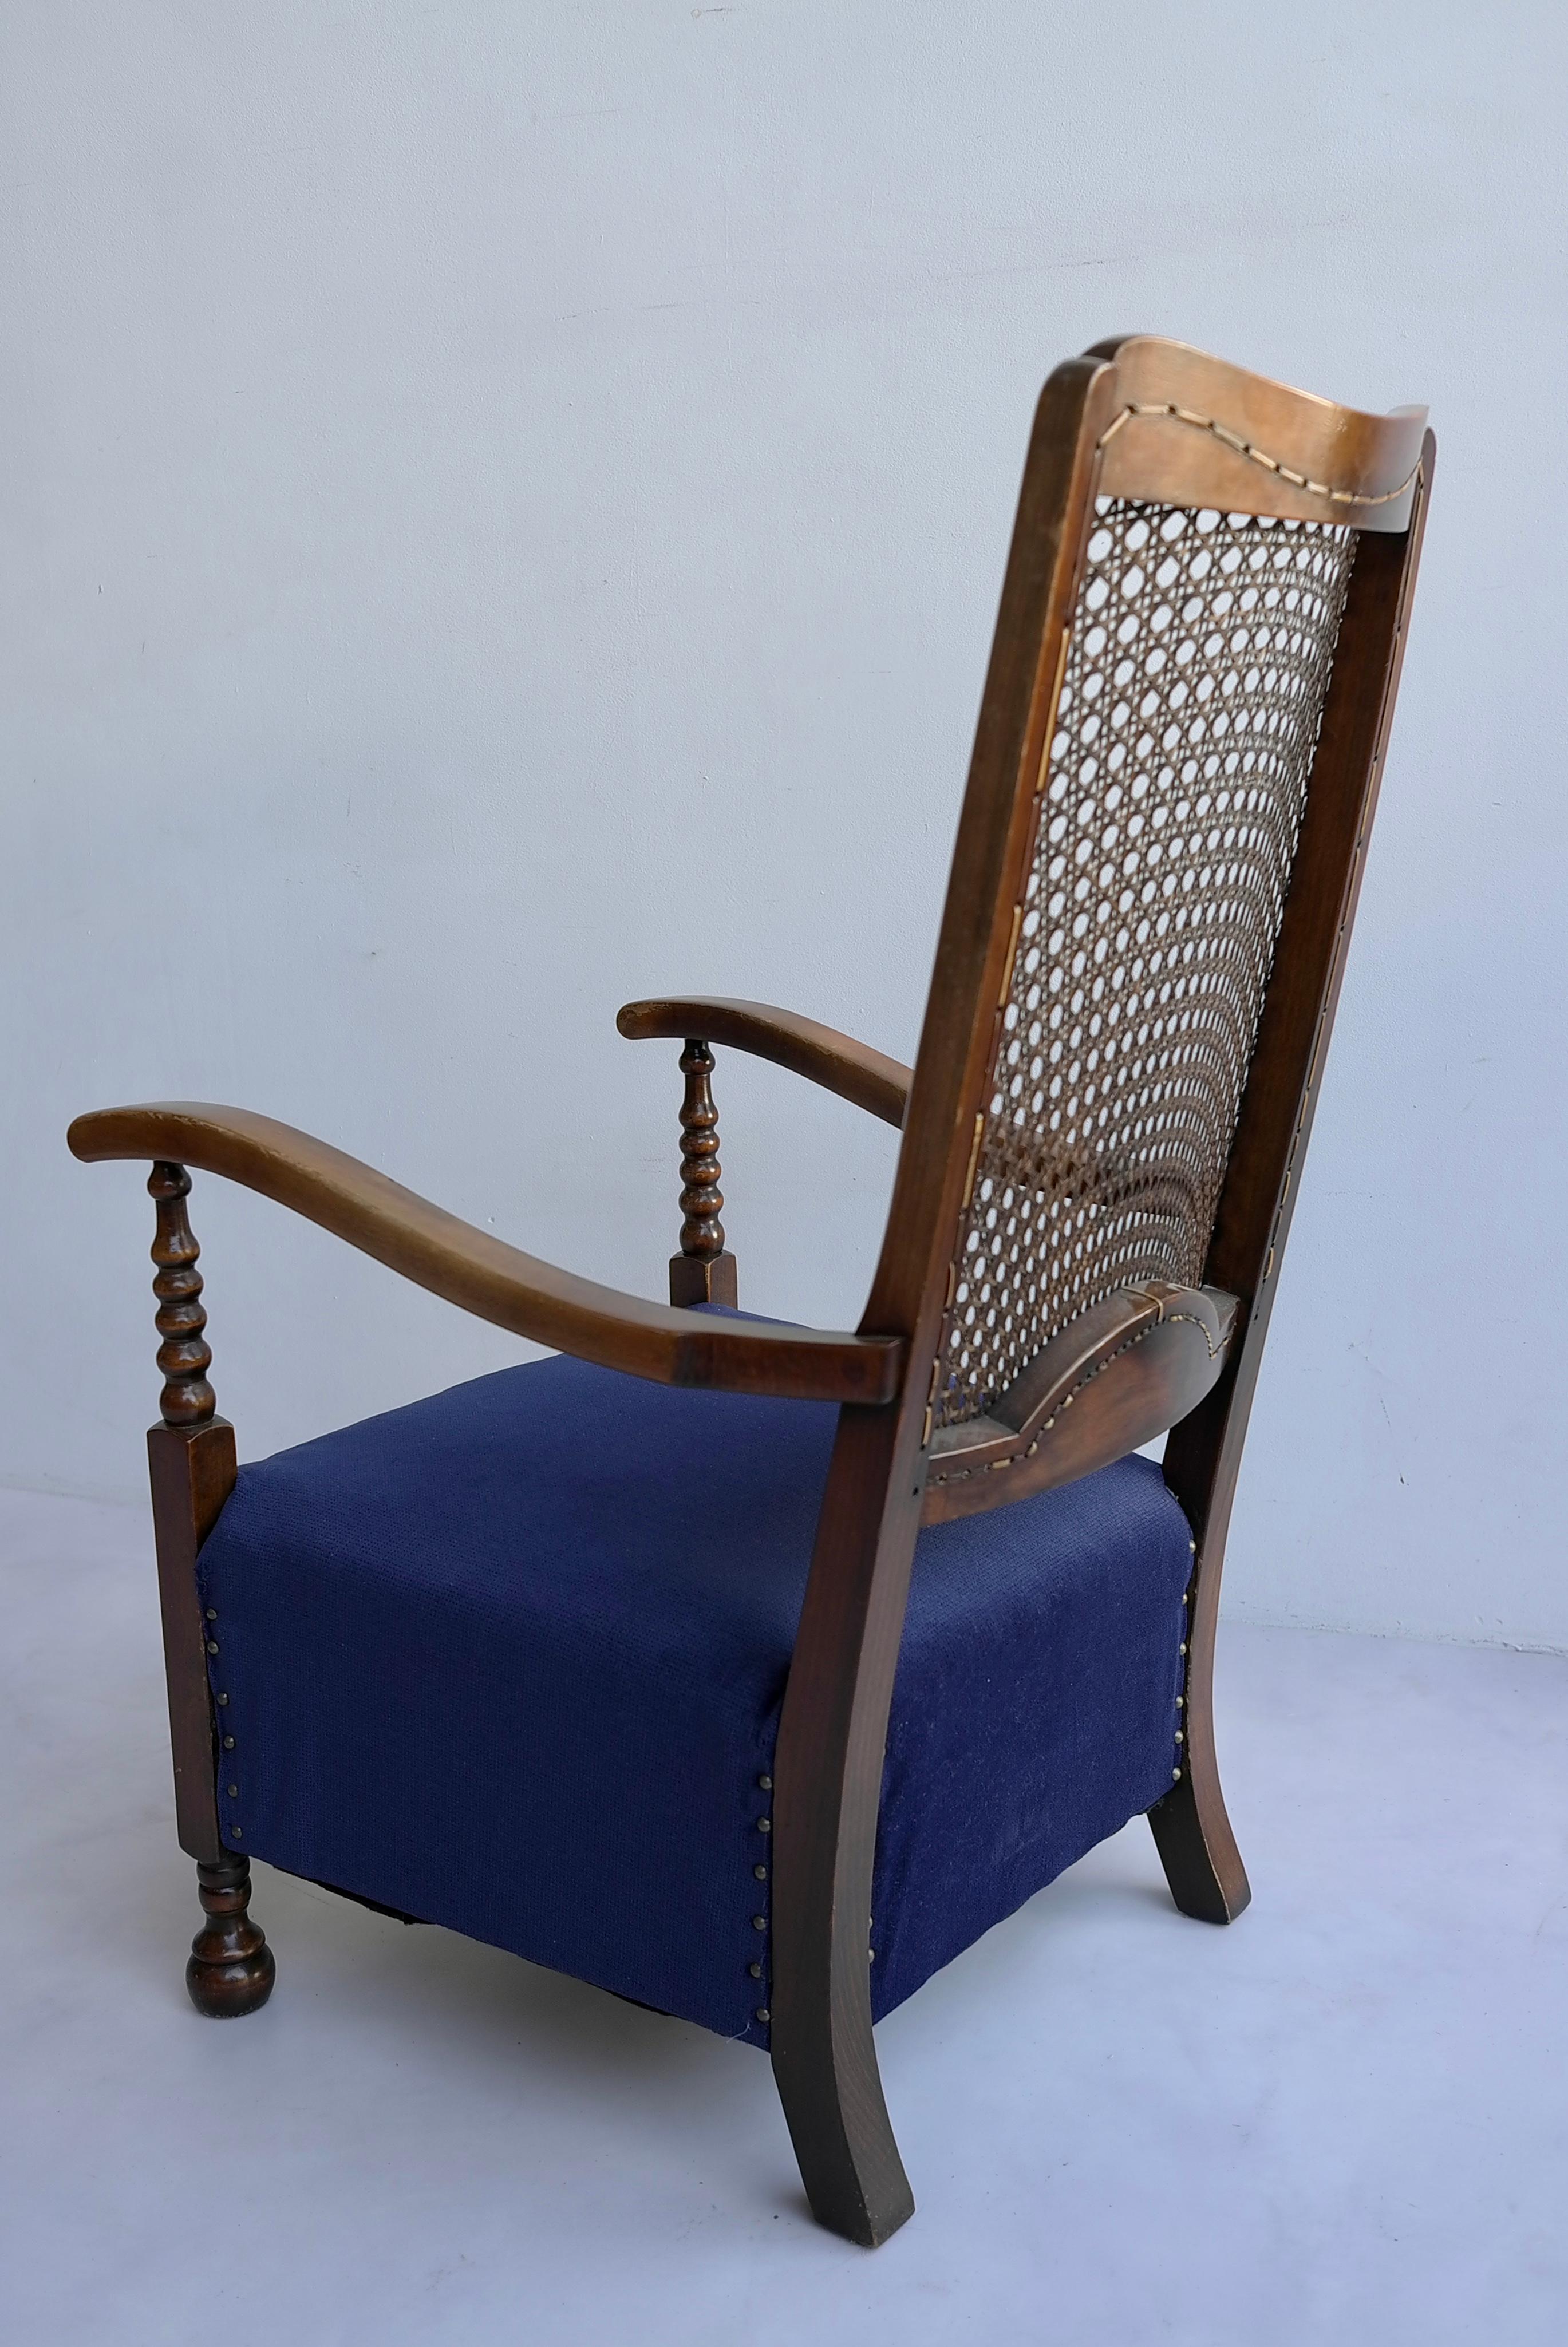 European Classic Highback Lounge Chair with Blue Seat and Wooven Rattan Back